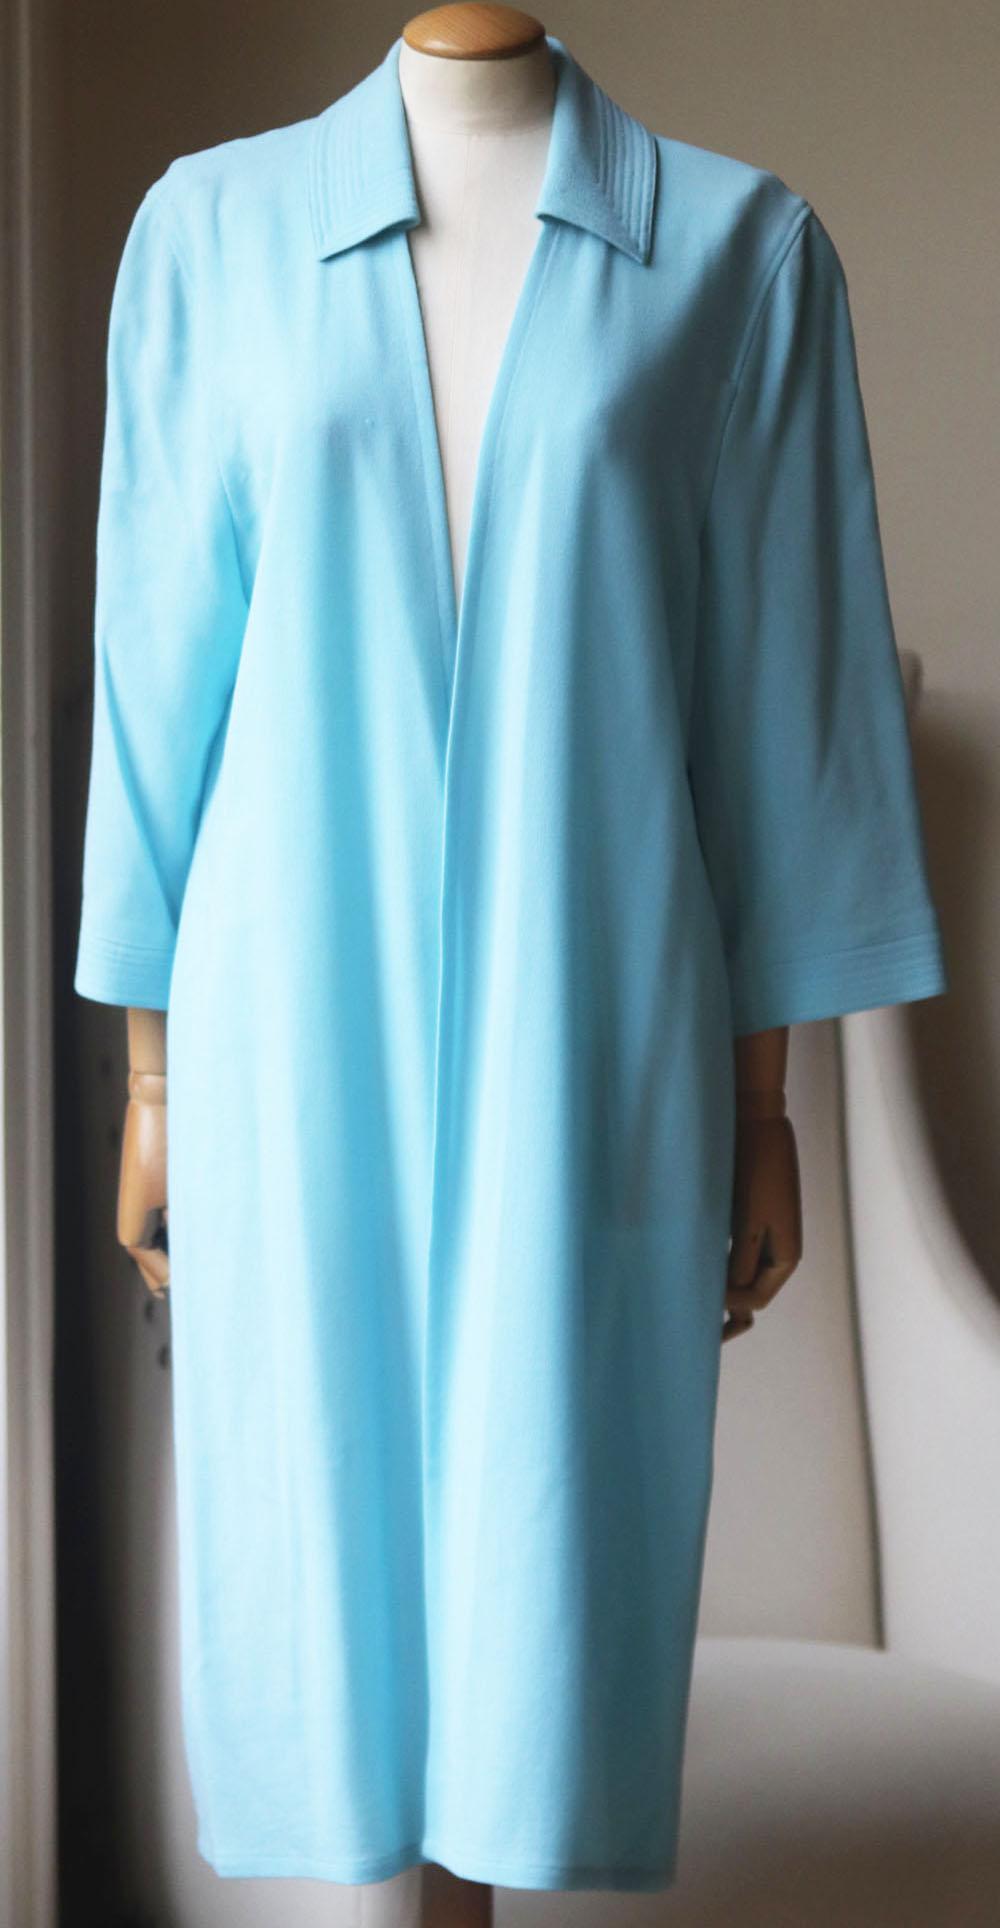 Jean Muir robe is made from wool-crepe and cut in a kimono-inspired silhouette with tie to wrap around the waist and the robe hangs loosely off your shoulders.  
Blue wool-crepe.
Ties at waist.
100% Wool; 100% acetate.

Size: UK 14 (US 10, FR 44, IT